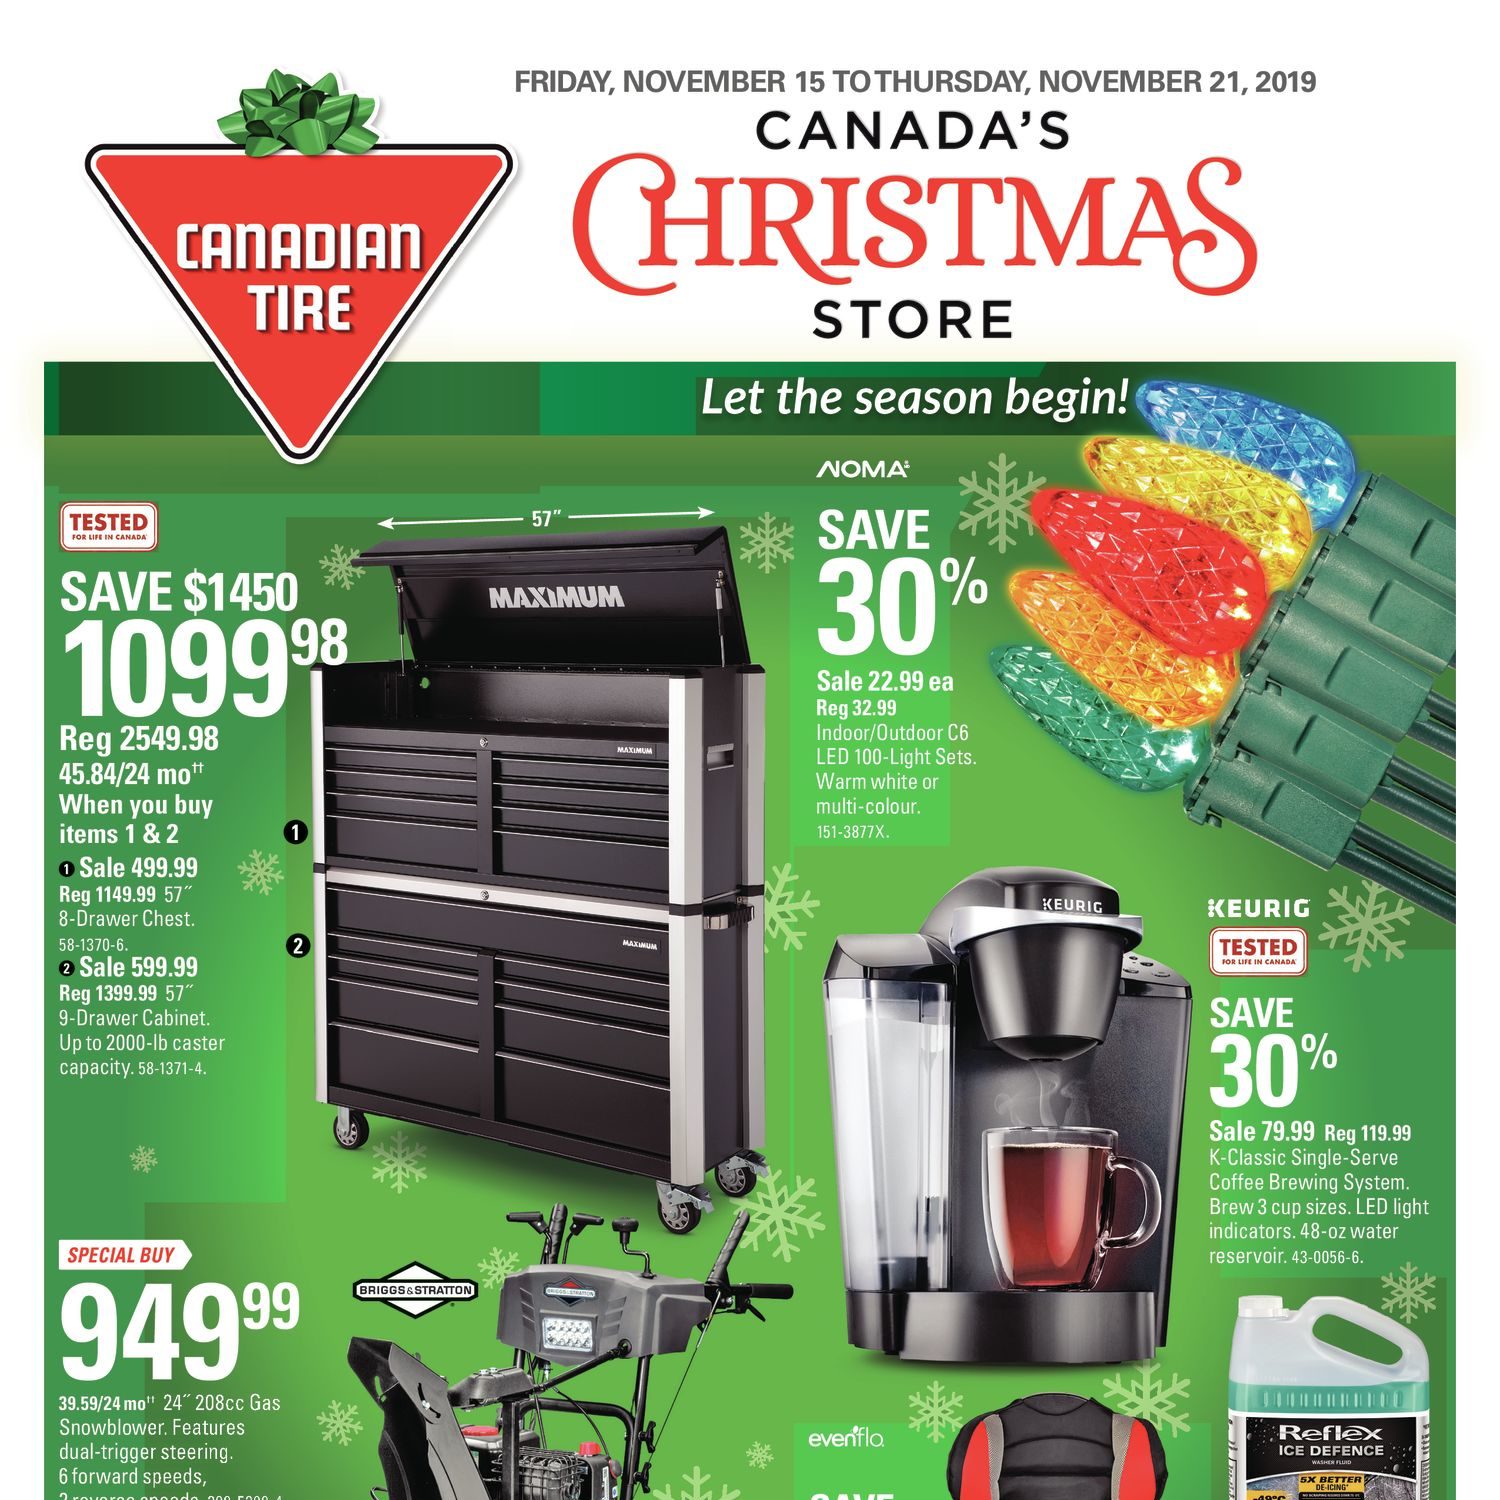 Canadian Tire Weekly Flyer Weekly Canada S Christmas Store